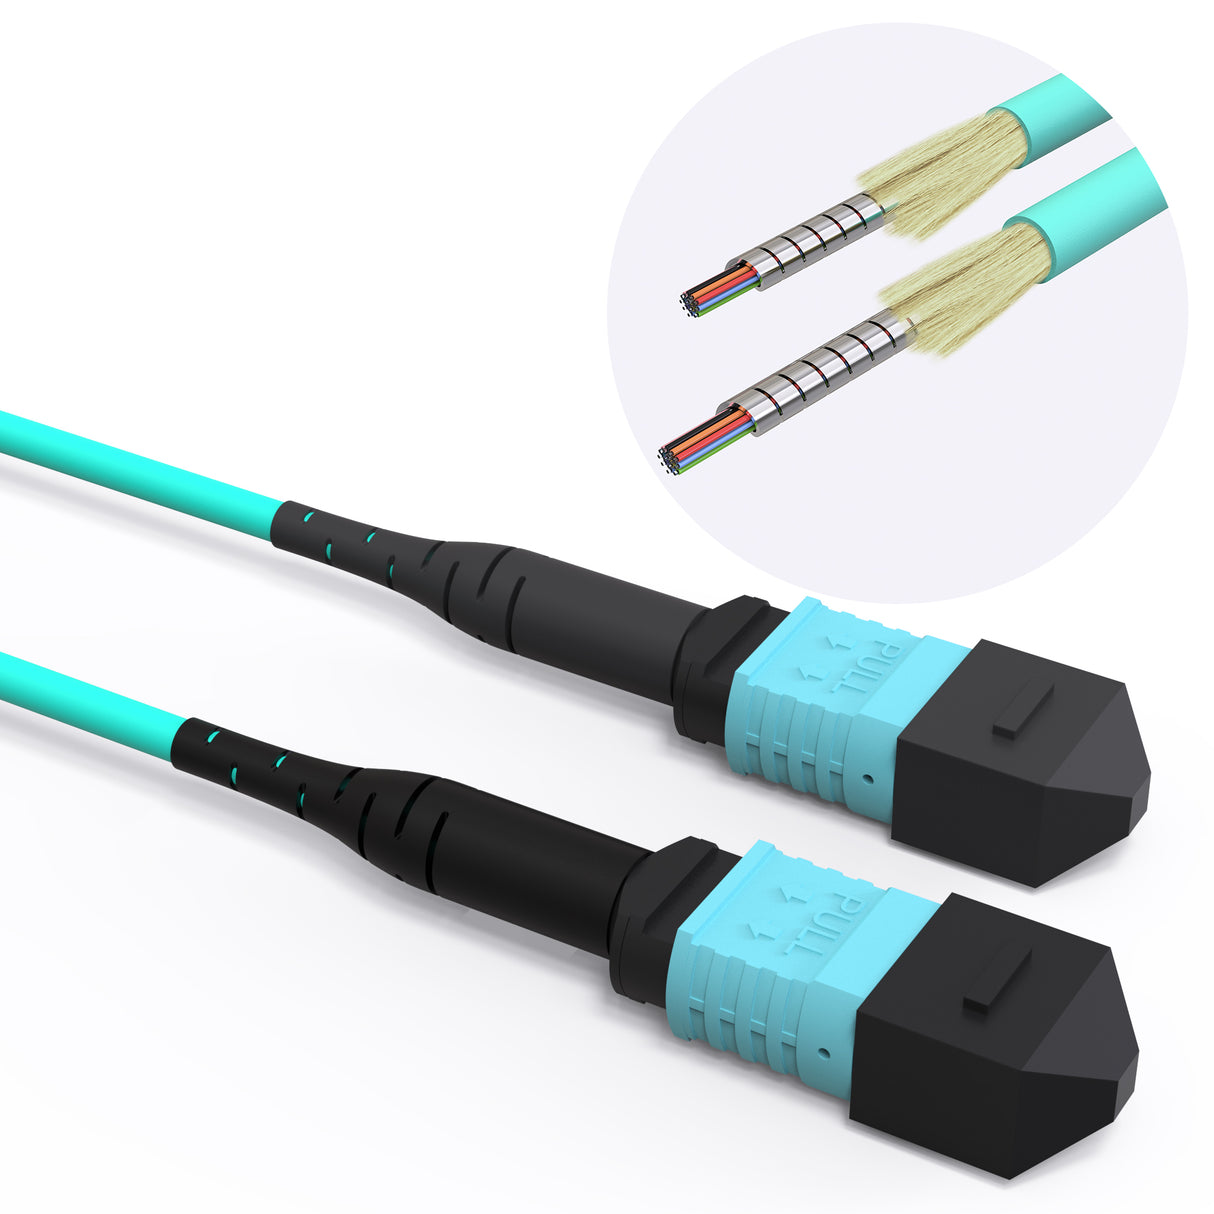 VANDESAIL MPO to MPO Armored Fiber Cable Aqua, 12 Strand OM3 Multimode Fiber, Compatible with MTP/QSFP+ for High-Density Networking